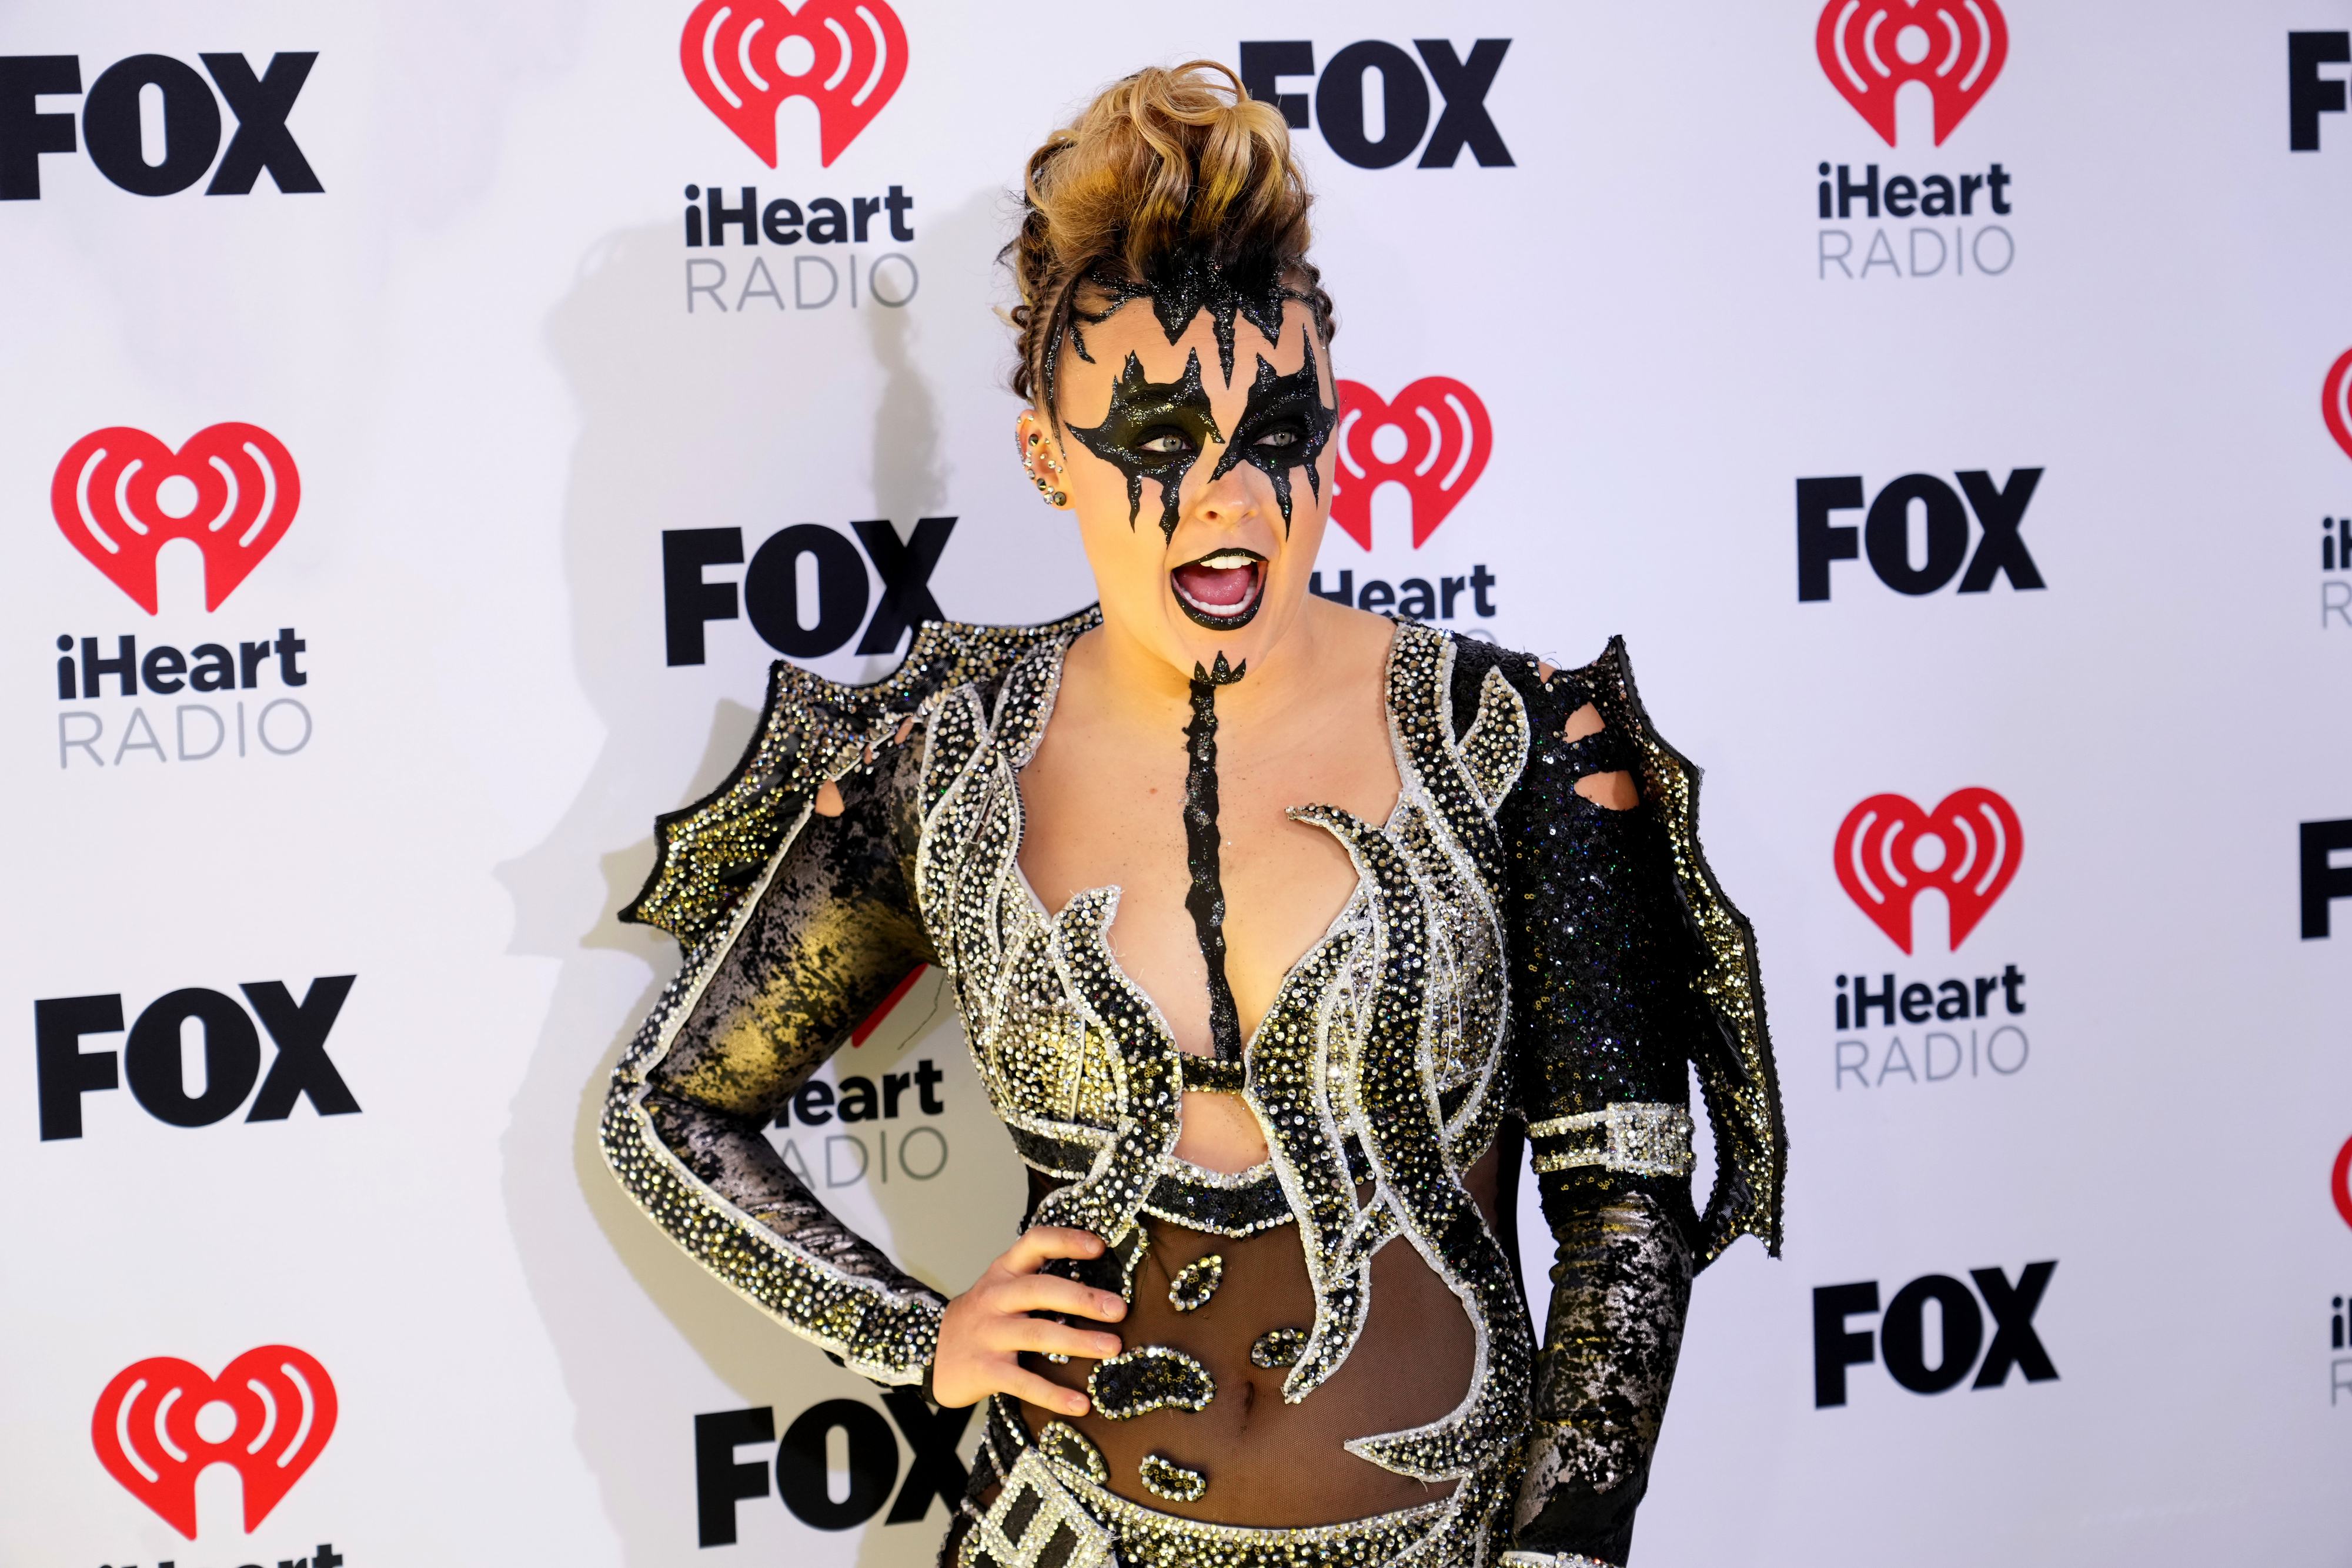 JoJo Siwa in an elaborate costume with face paint at the iHeartRadio event